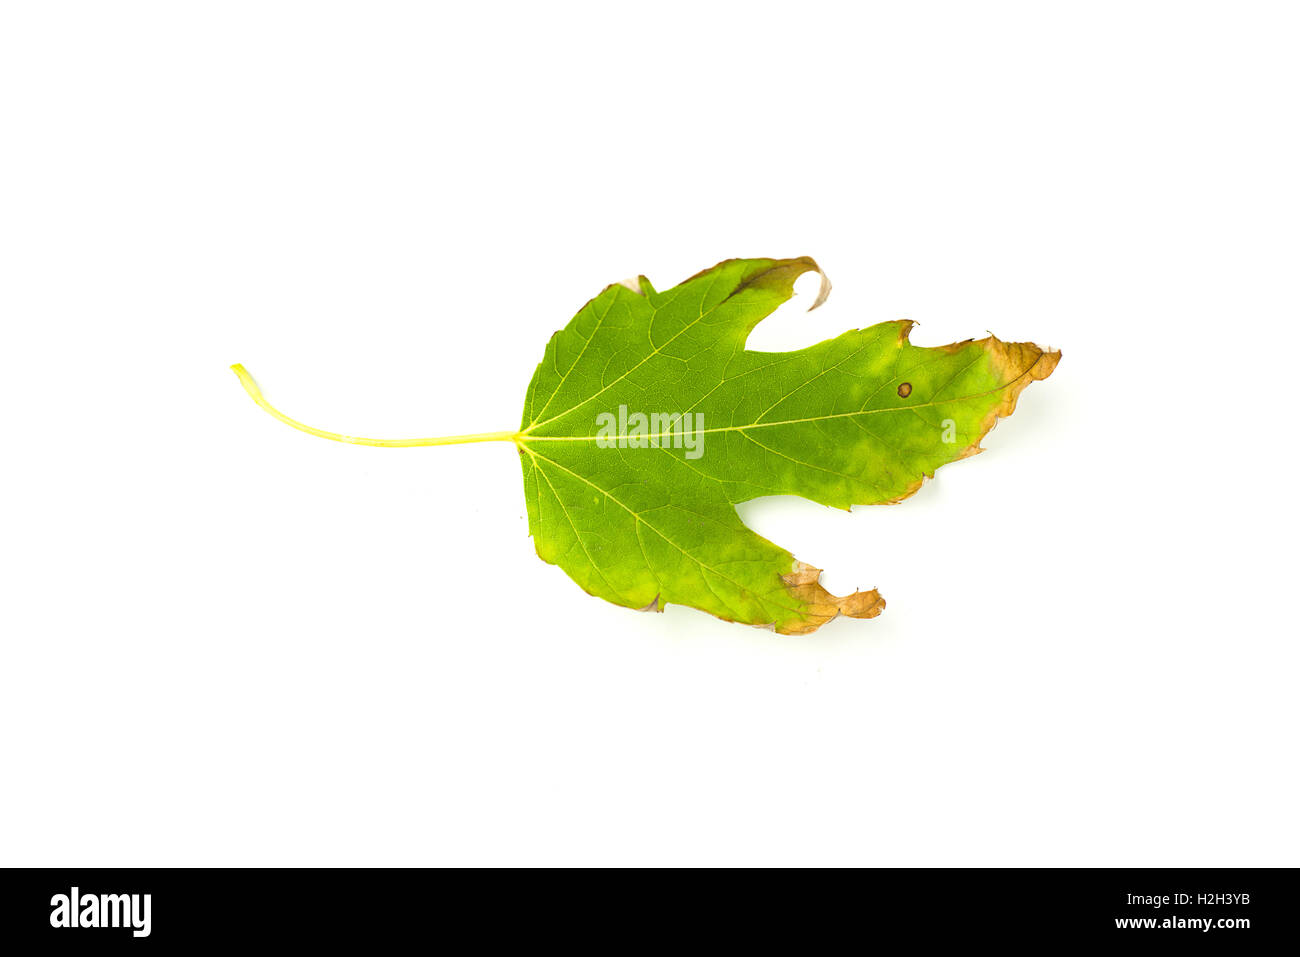 Dry fallen autumn leaf of a tree on over white Stock Photo